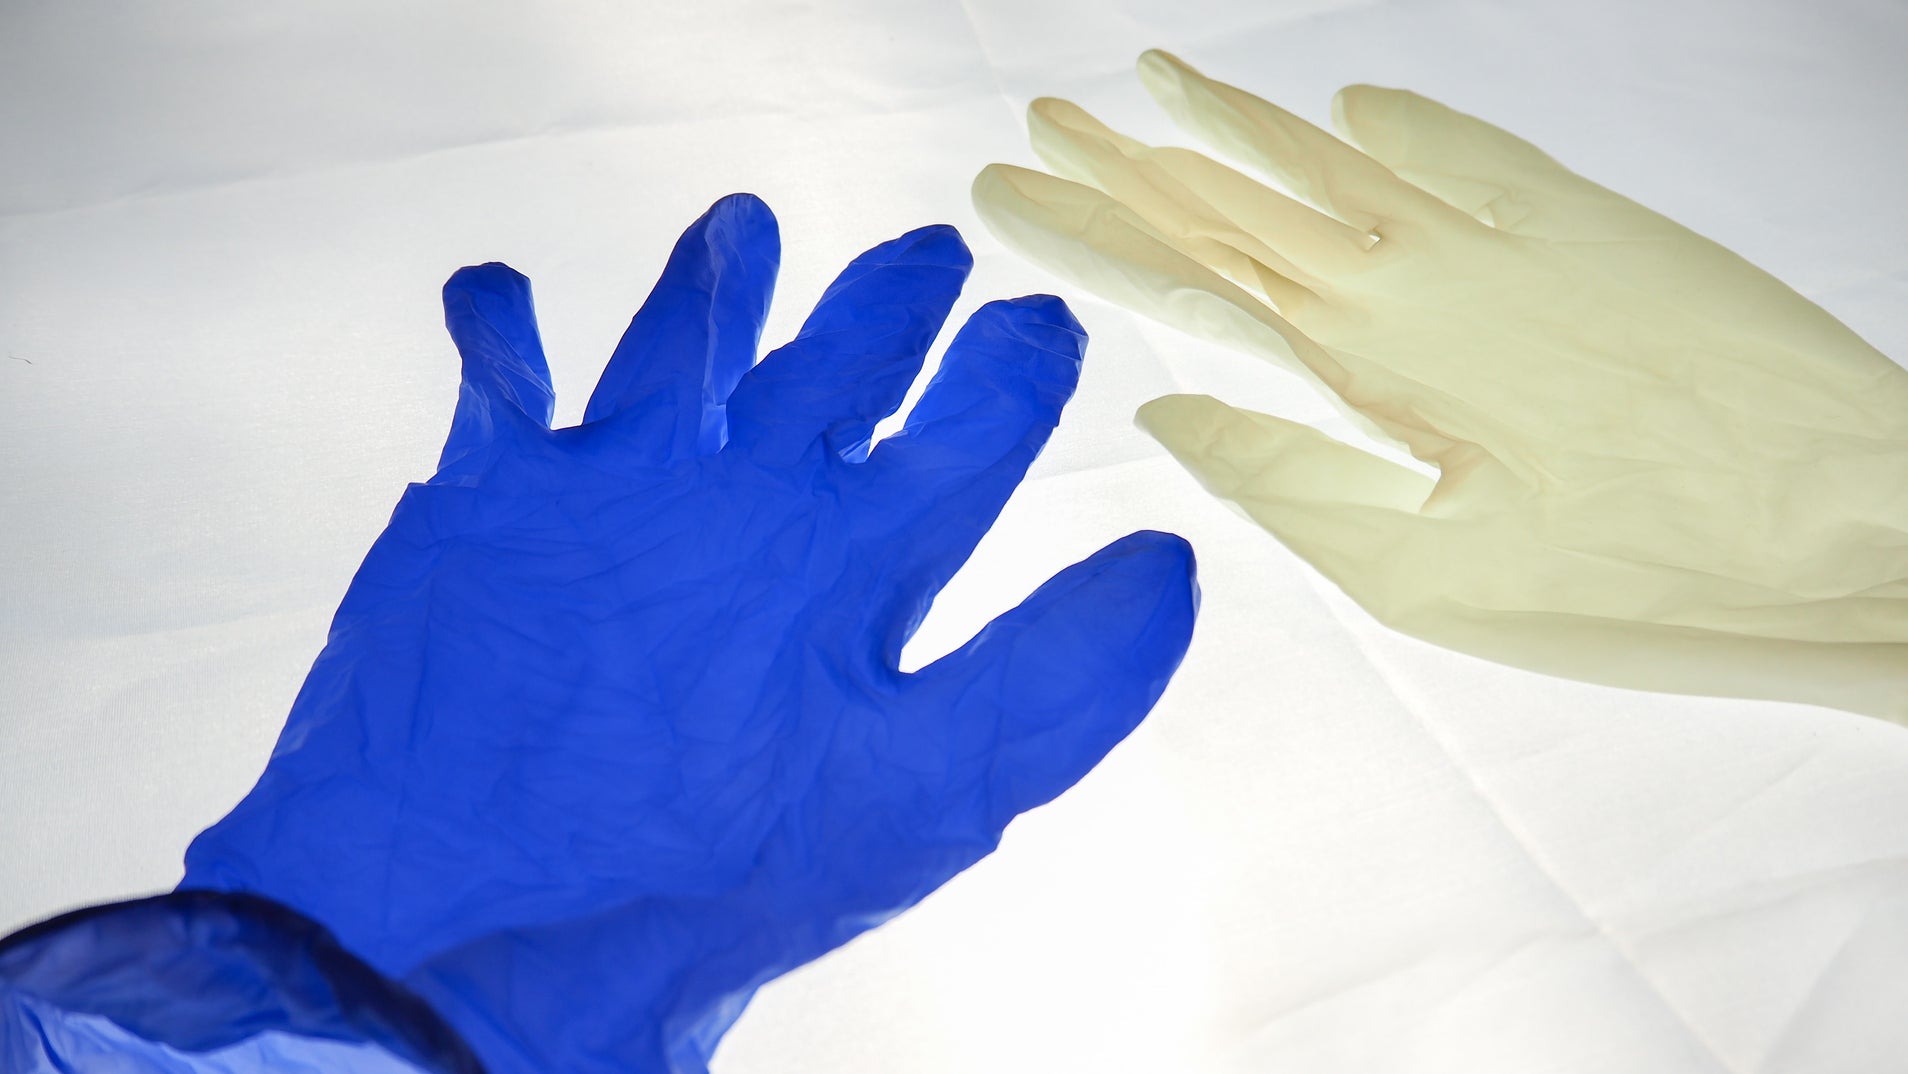 Safe Ways to Properly Remove Gloves: A Step-by-Step Guide